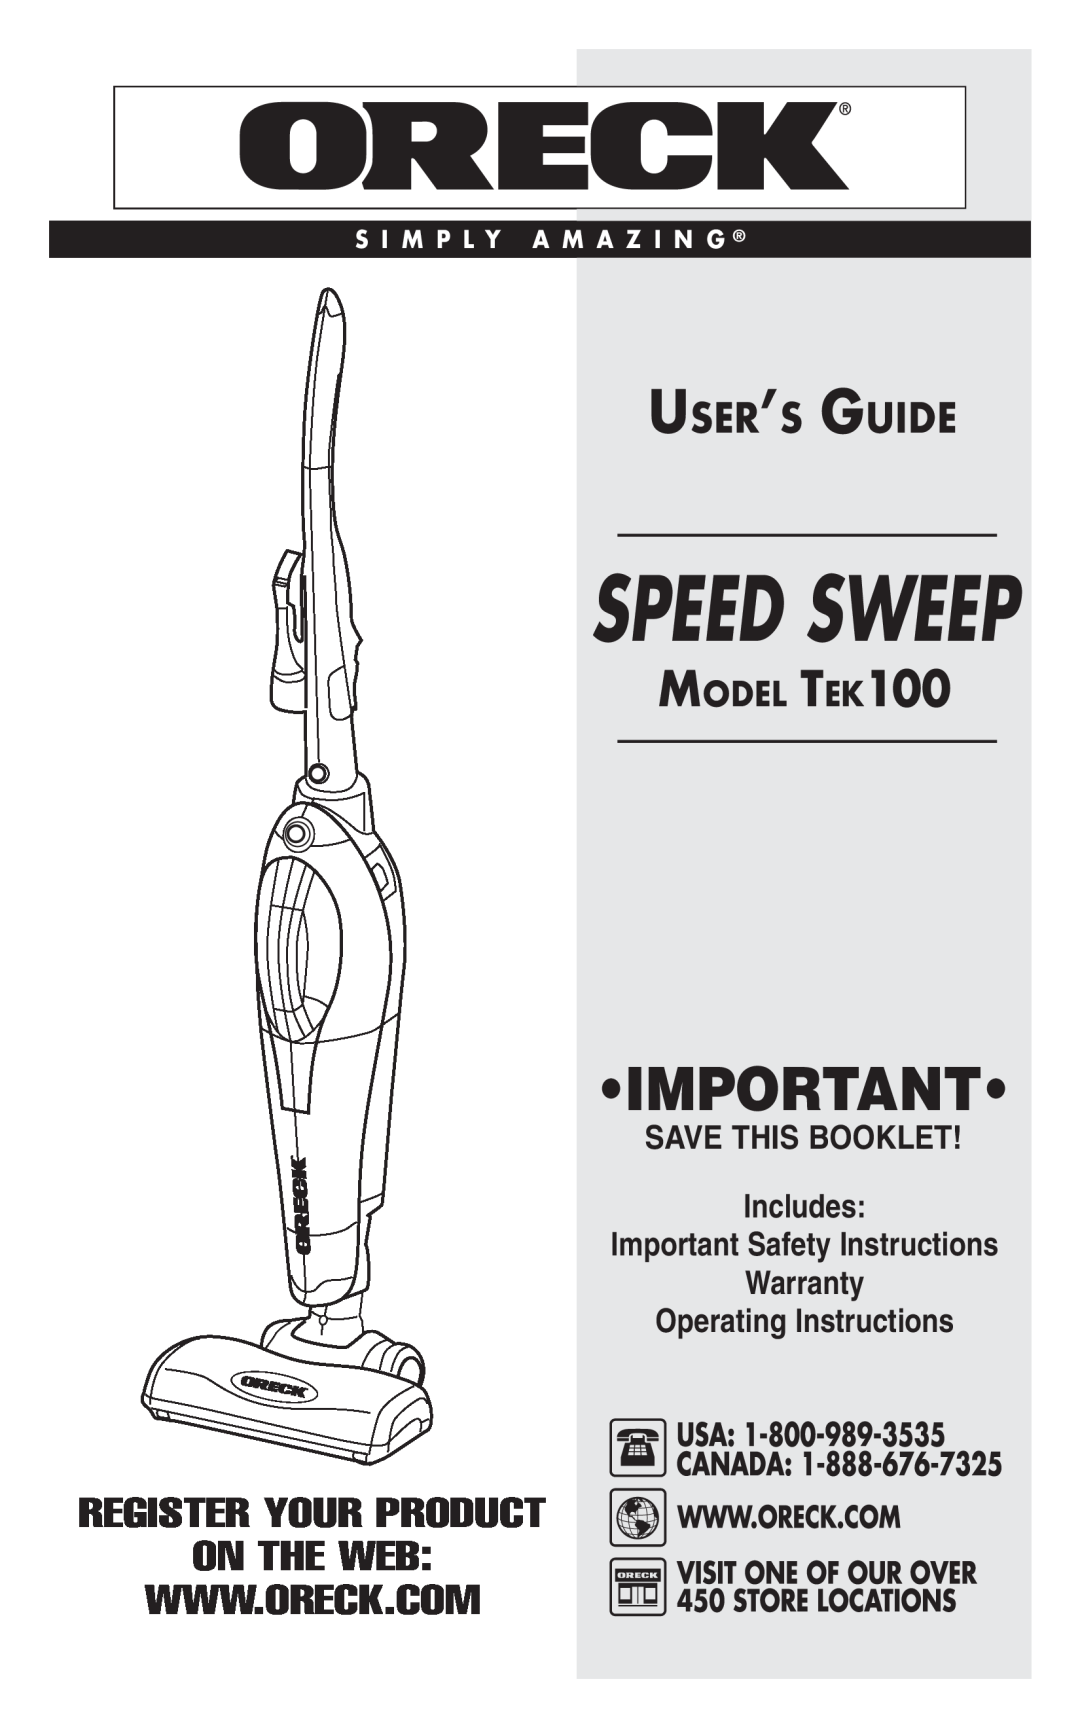 Oreck TEK 100 important safety instructions Speed Sweep, User’s Guide, Model Tek100, SAVE THIS BOOKLET Includes 